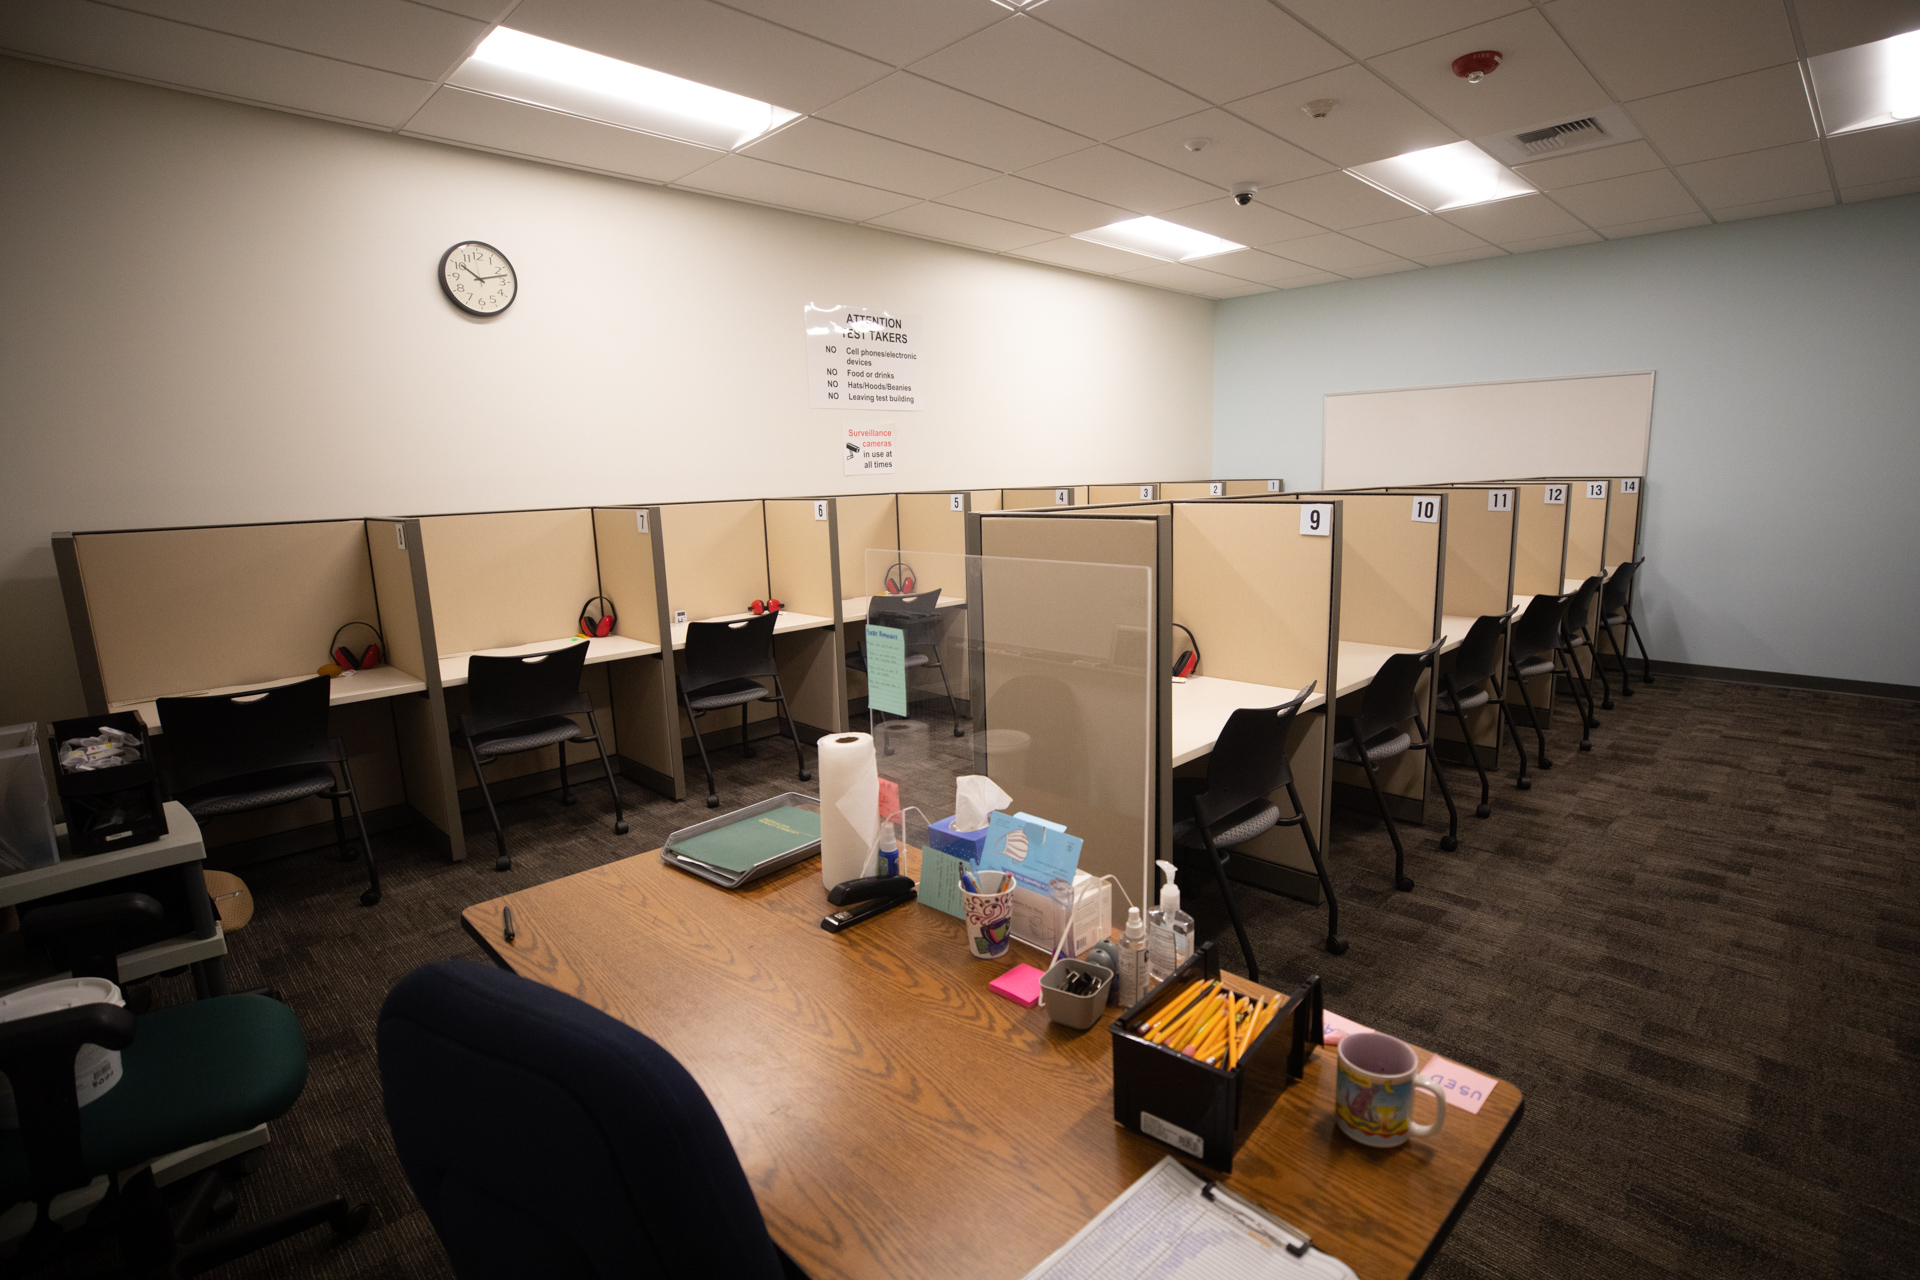 Sacramento State's new Disability Access Center offers study spaces, shown here, among other features.